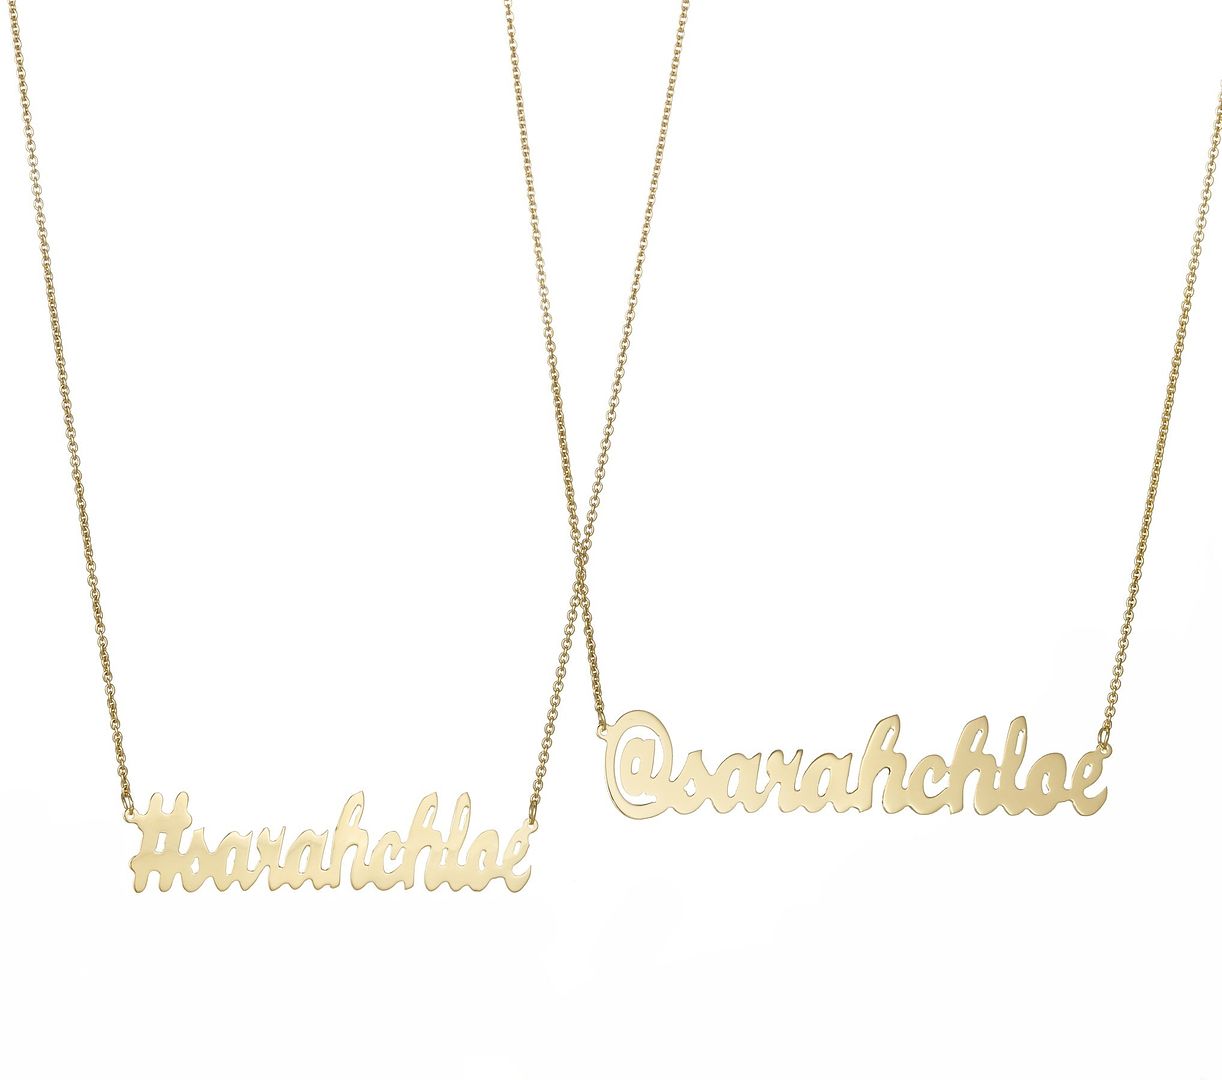 Geeky jewelry for Mother's Day: Social media name plate necklaces